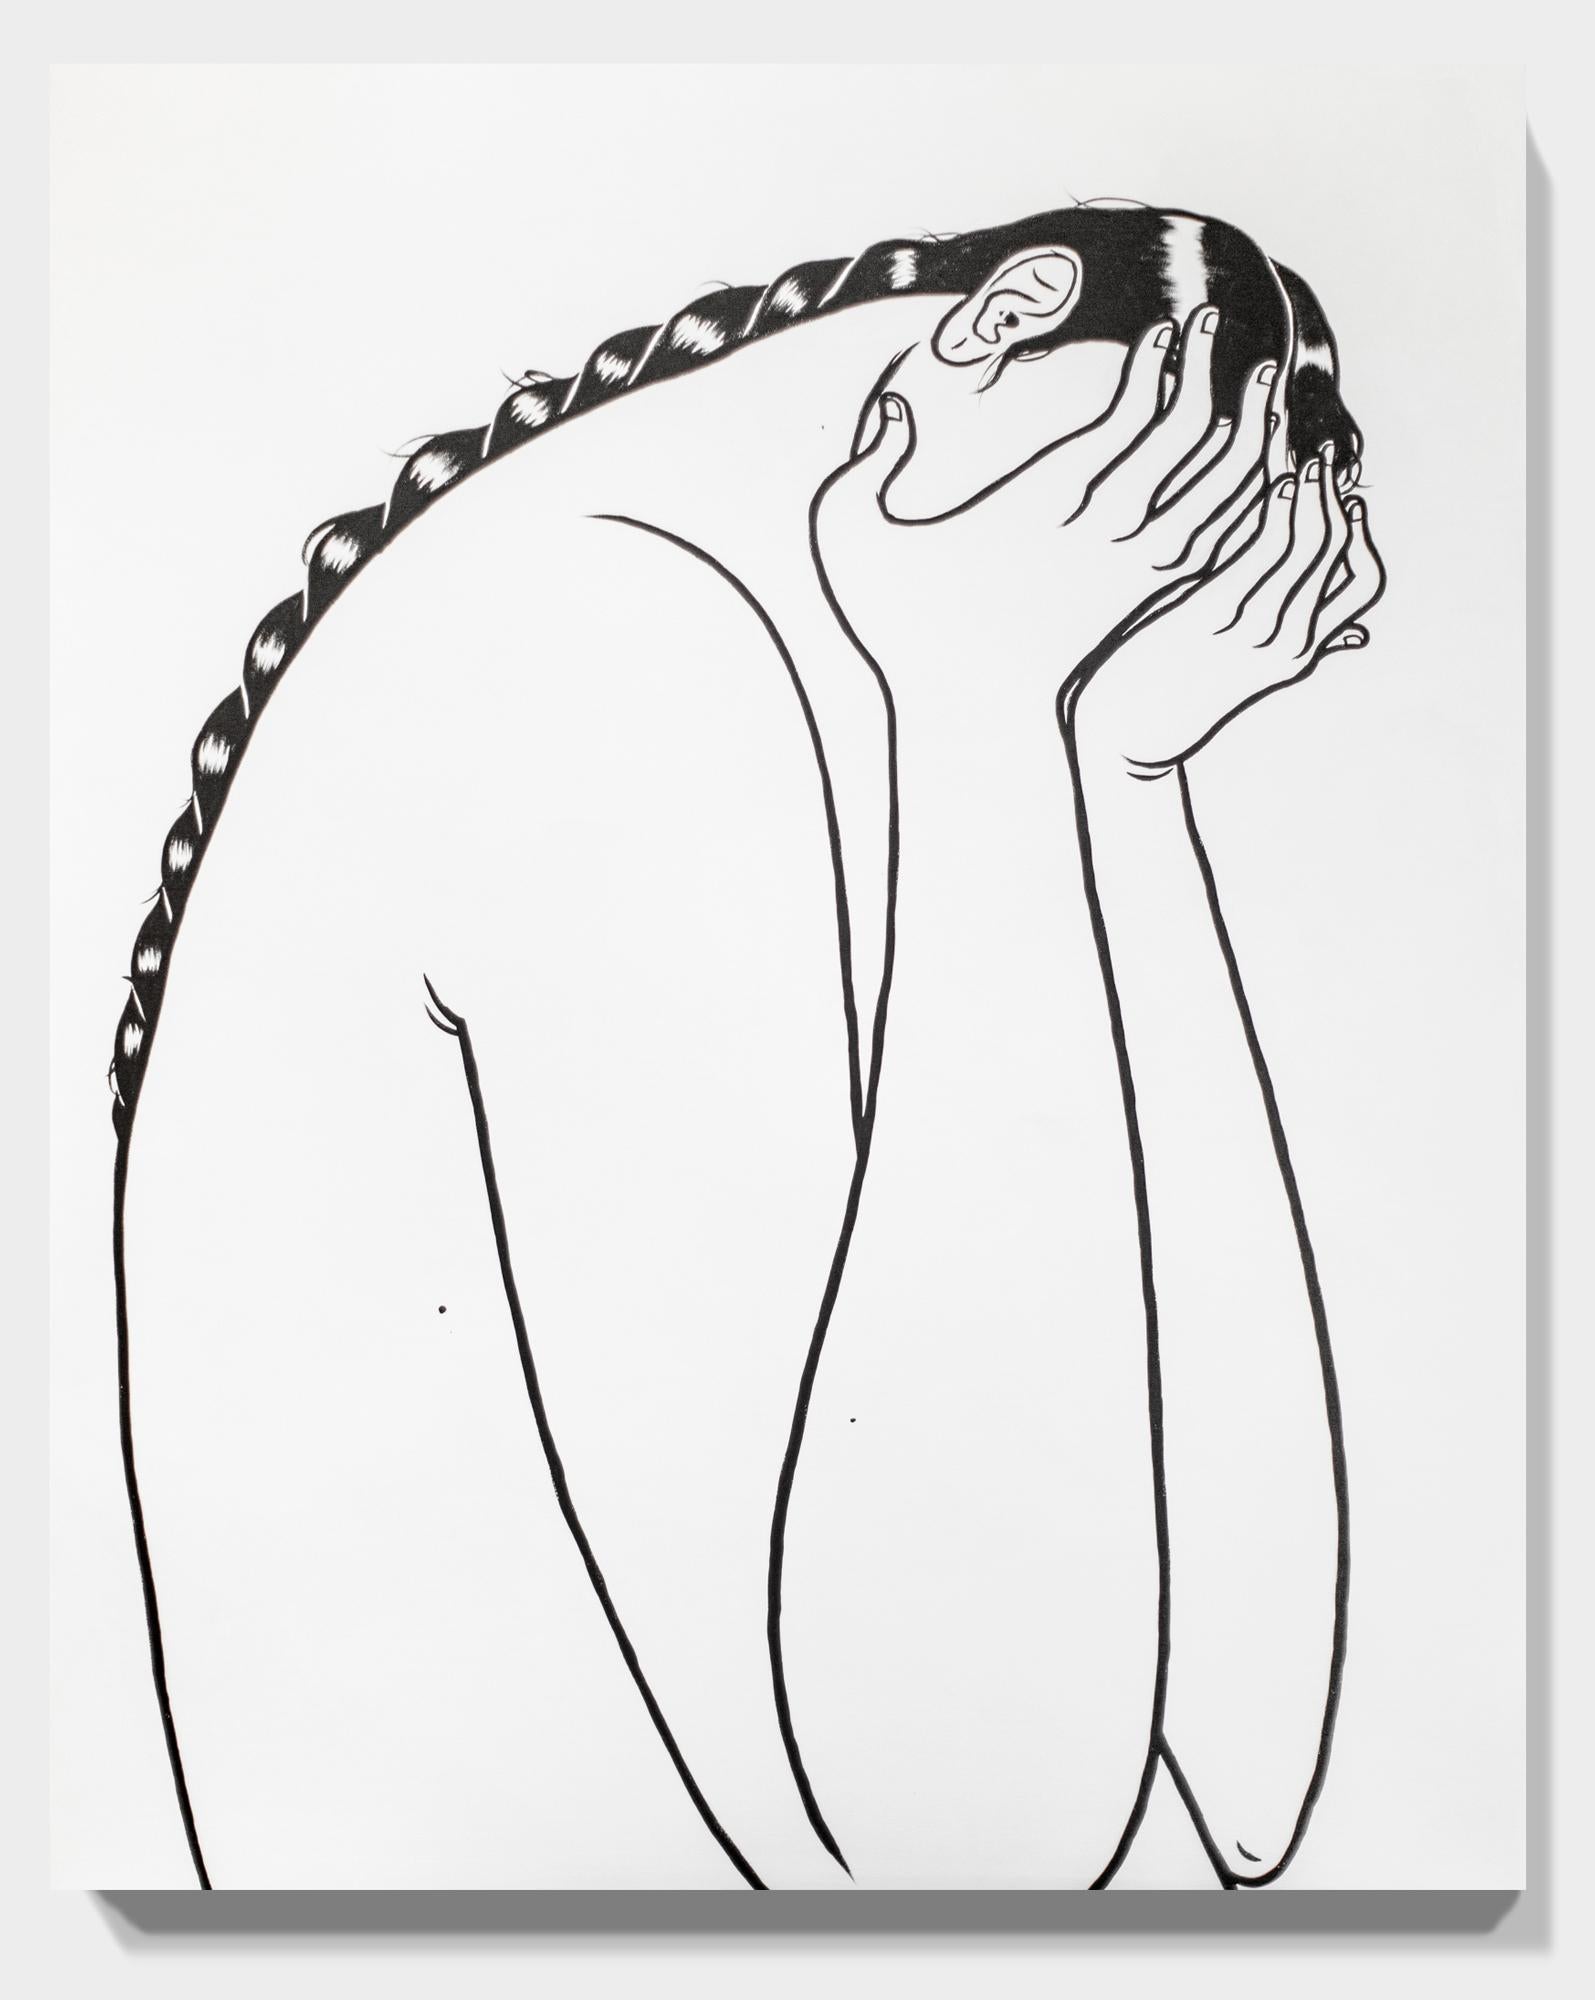 This figurative black and white painting titled 